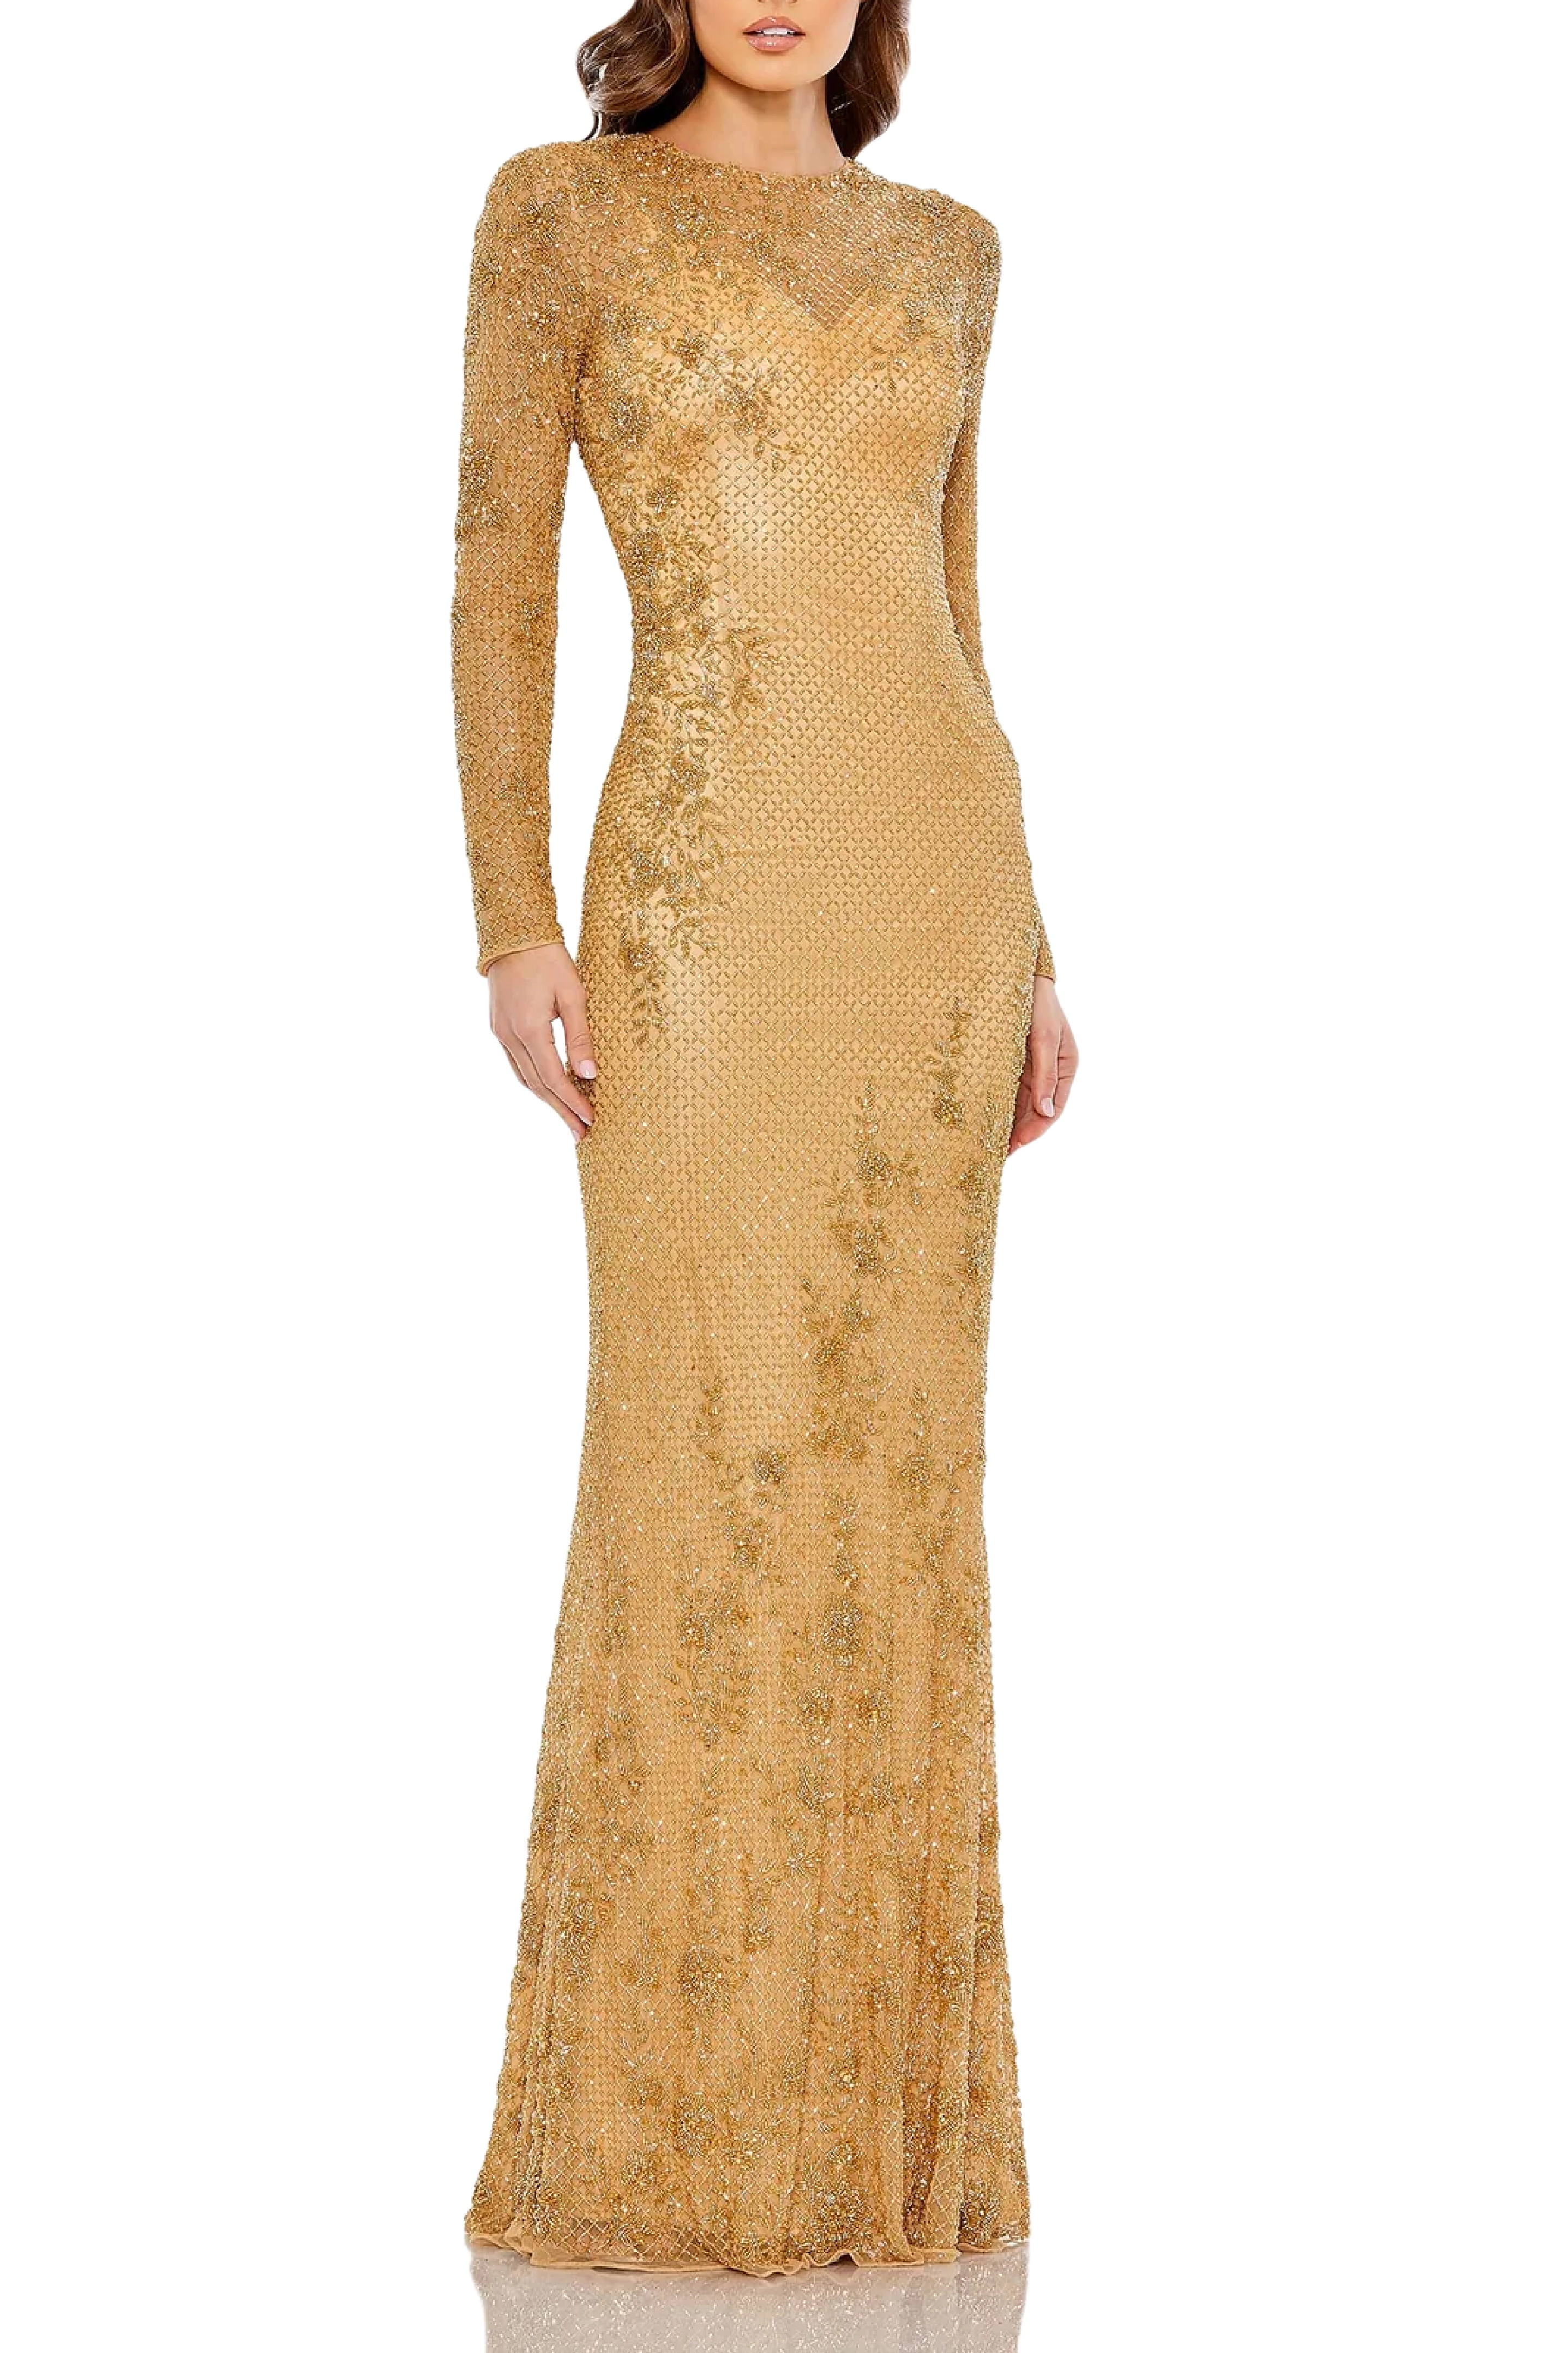 Long Sleeve Embellished Evening Gown